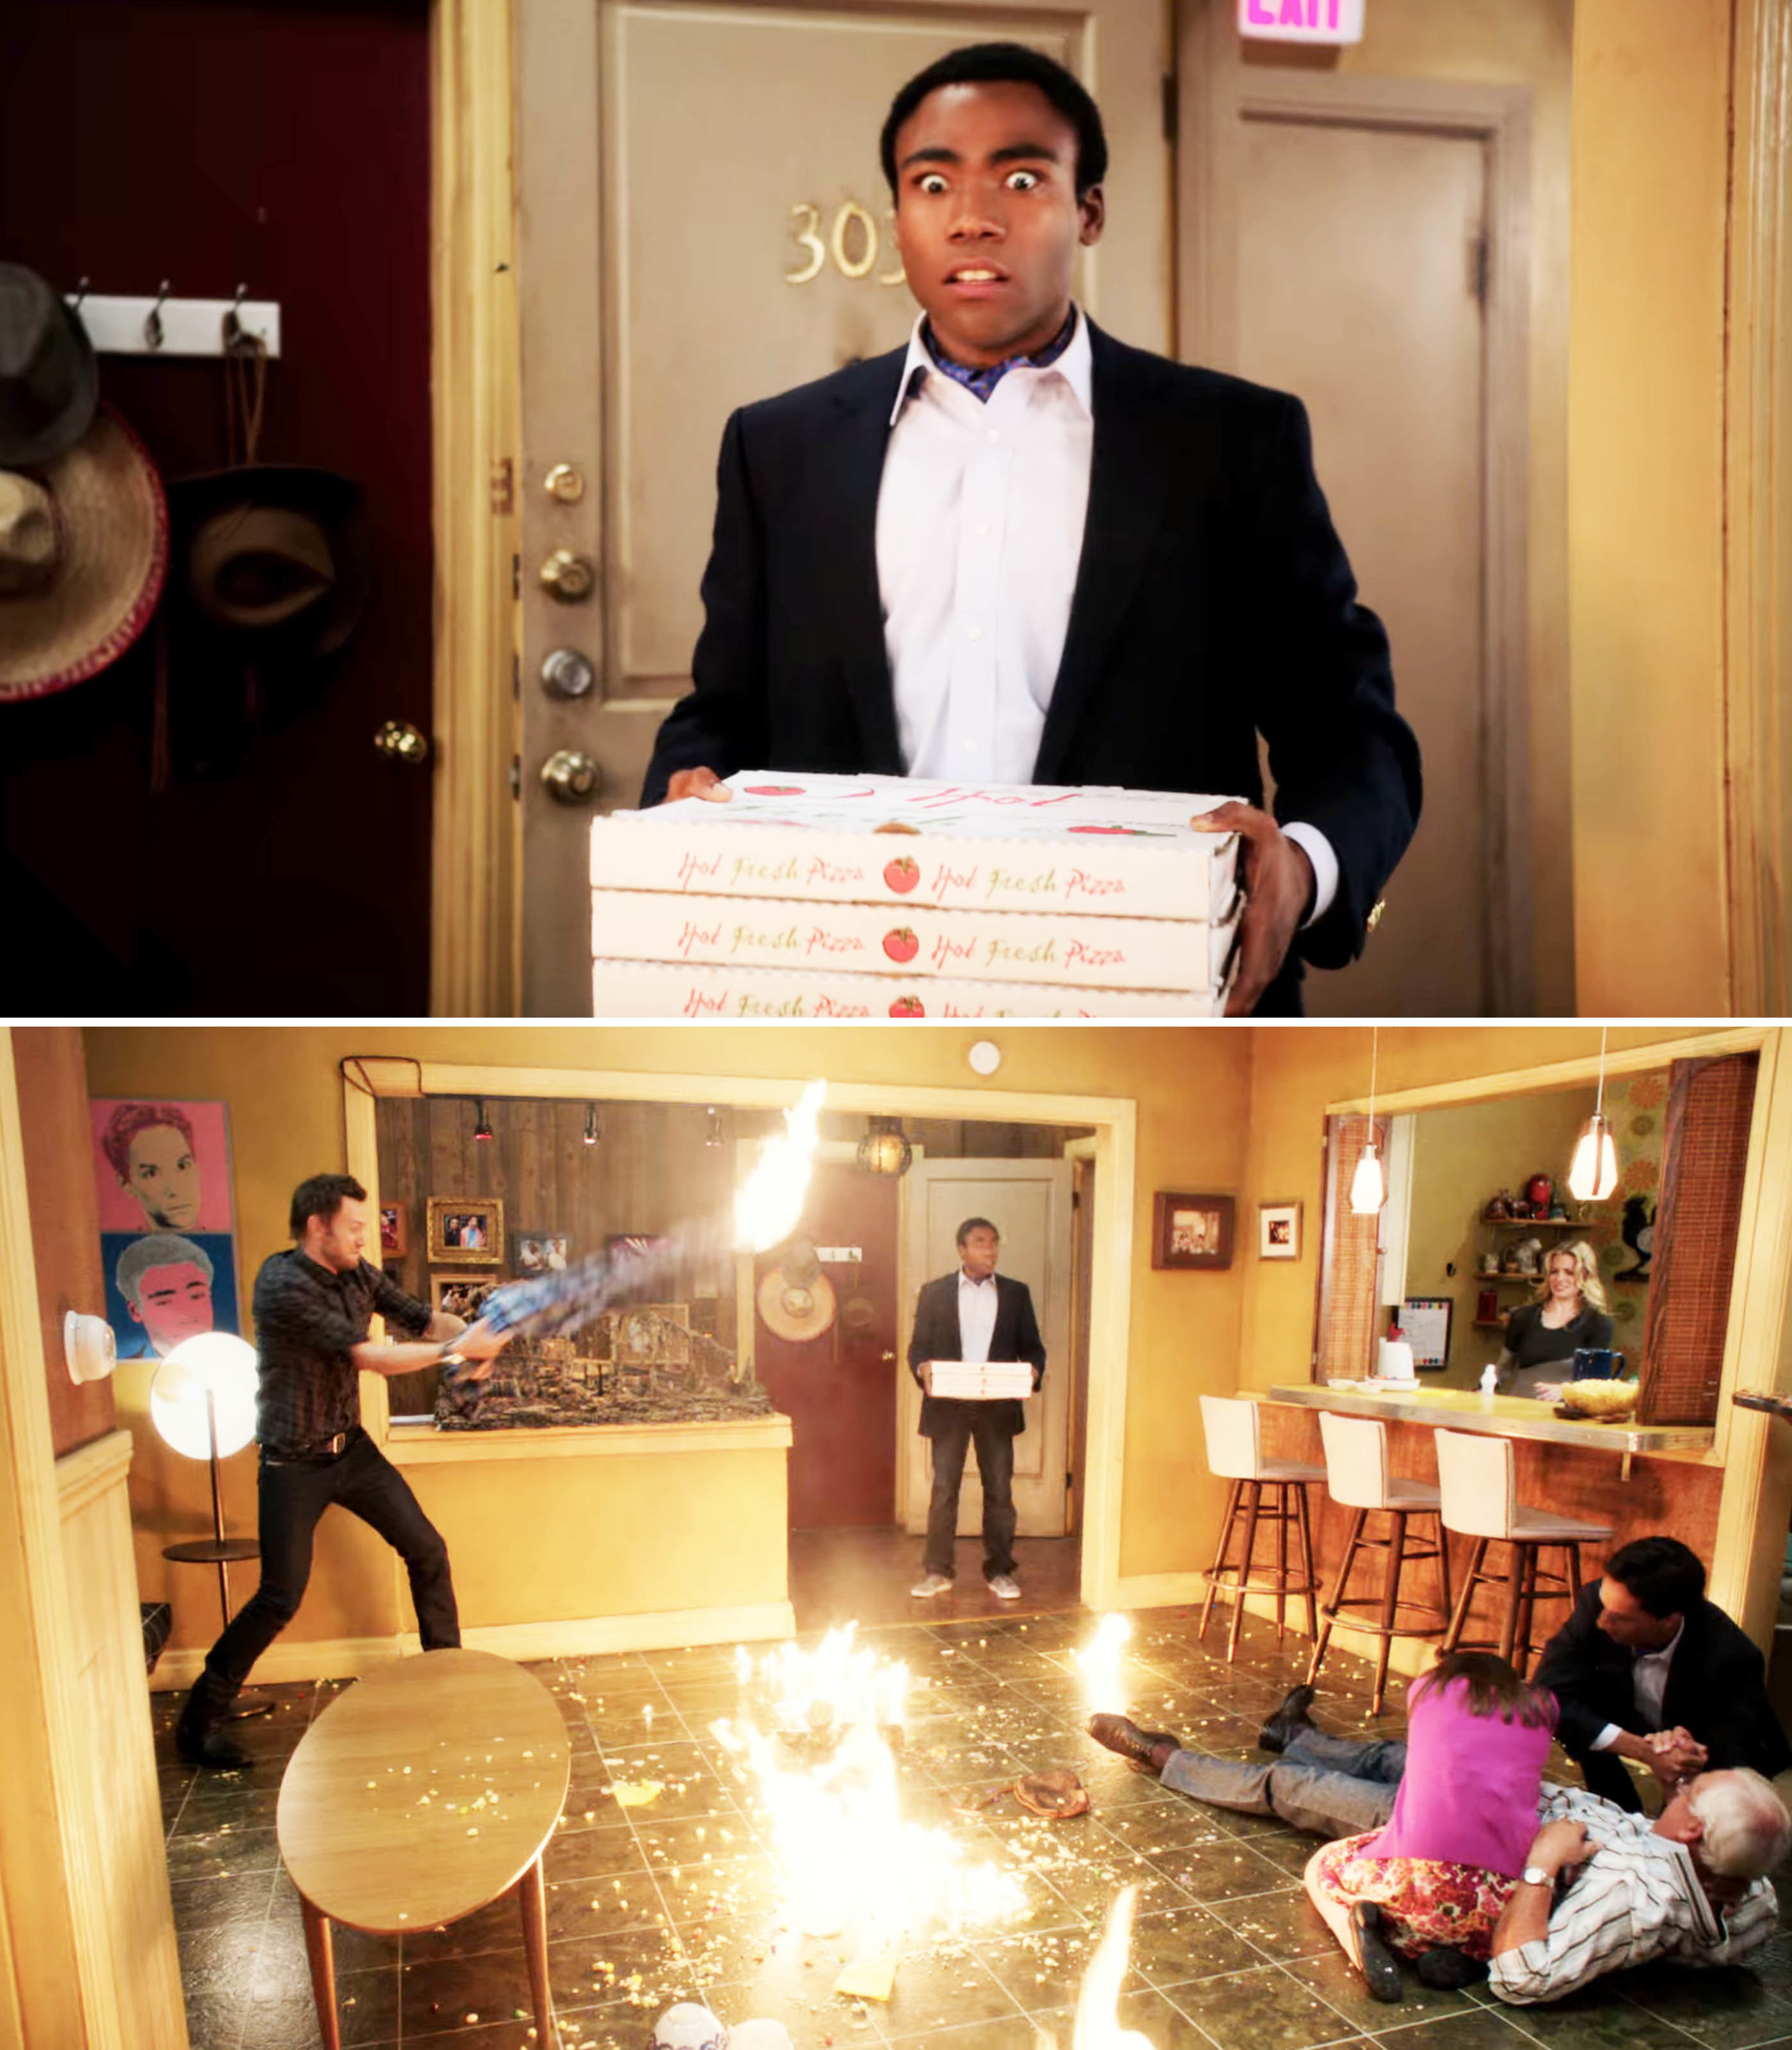 character walking into a room with fire and people on the ground while he stands there shocked holding boxes of pizza